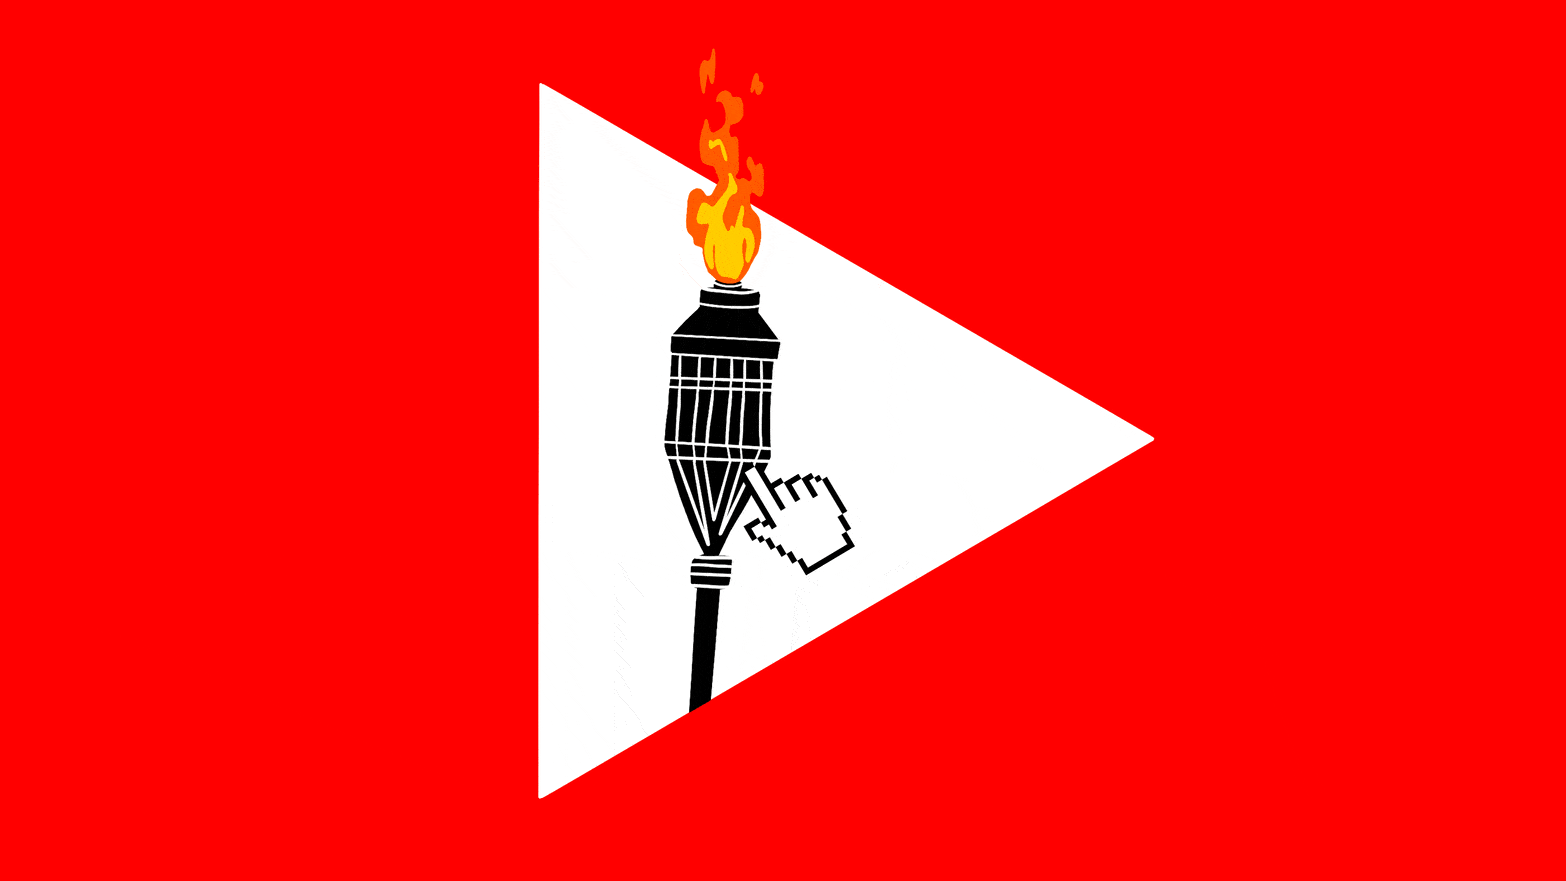 Illustrated gif of a flickering tiki torch in a YouTube play symbol.